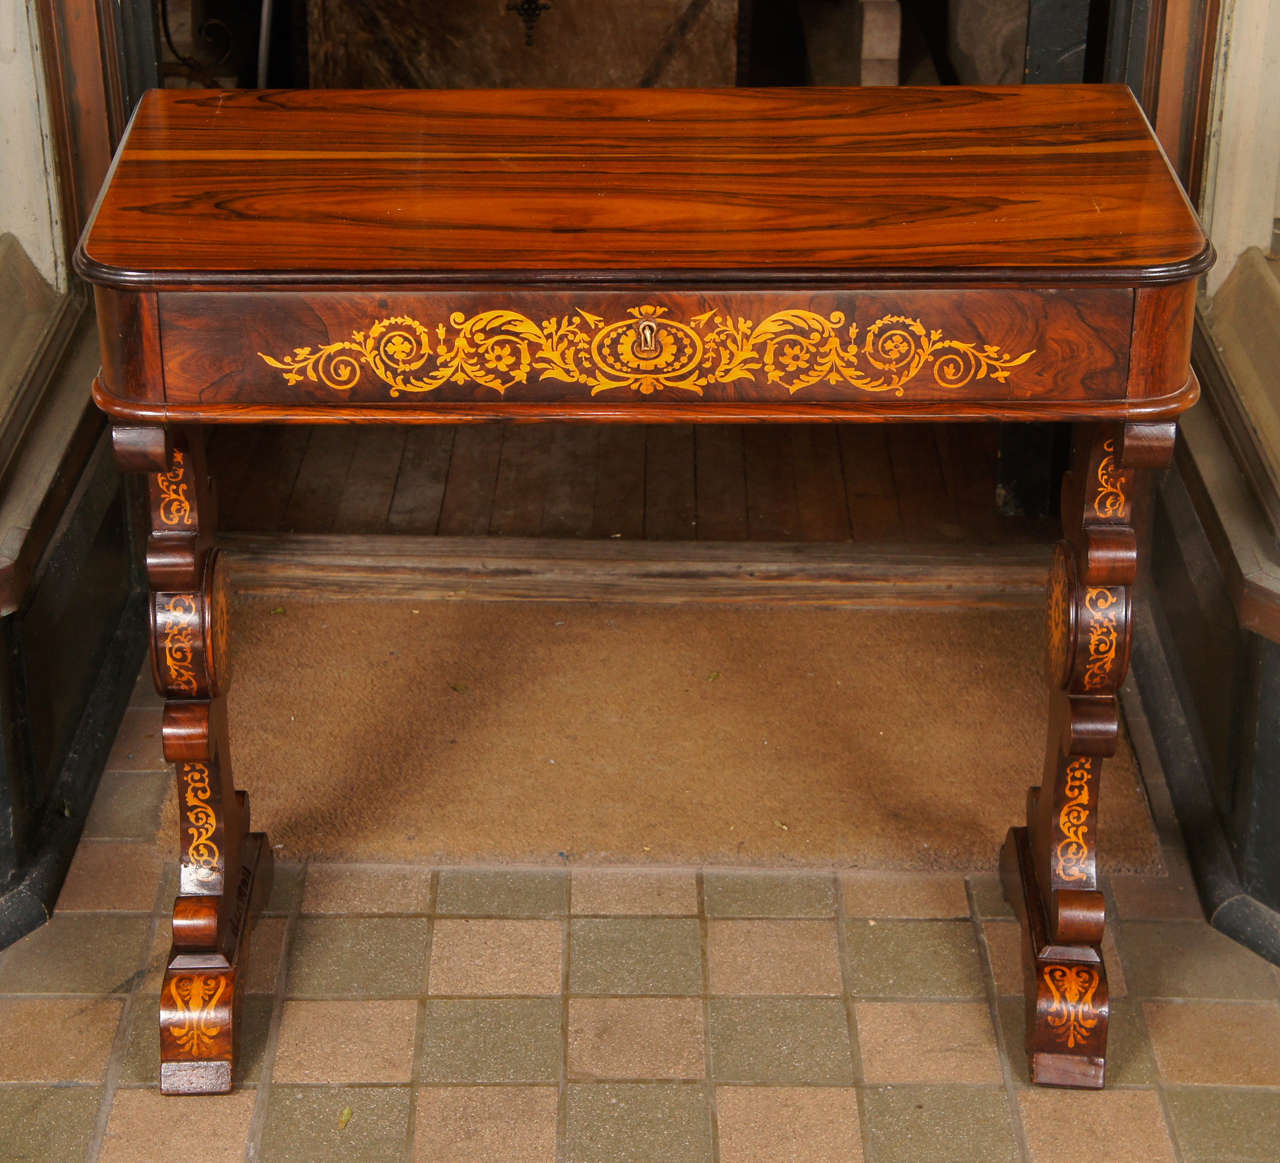 This fine and lovely small french writing table would also work well as a small console as it is flat and undercoated along the back side. The piece  is constructed as a molded top with rounded front  corners above a frieze drawer inlaid with